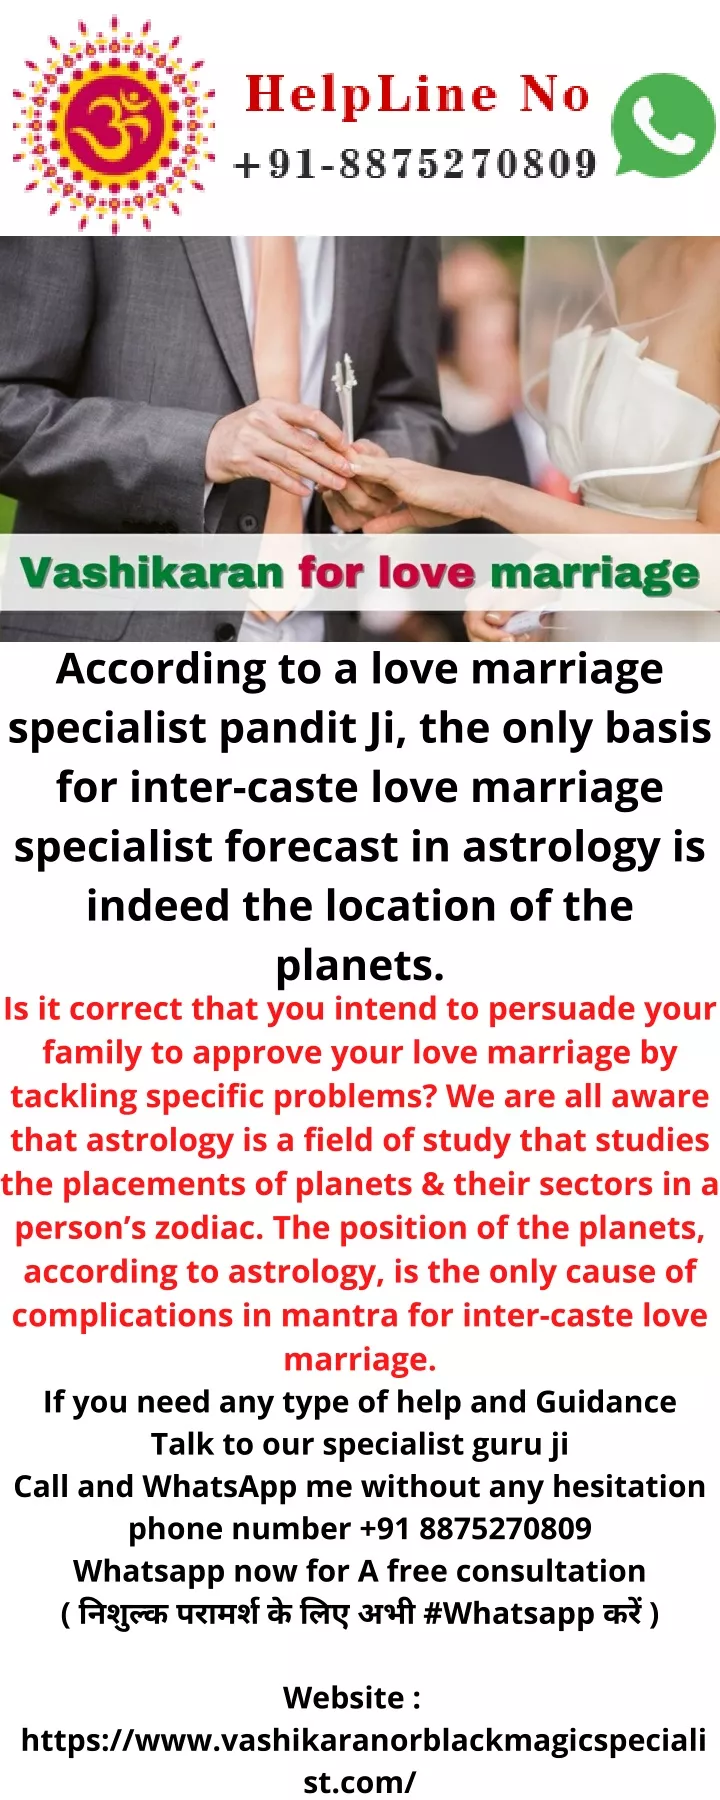 according to a love marriage specialist pandit